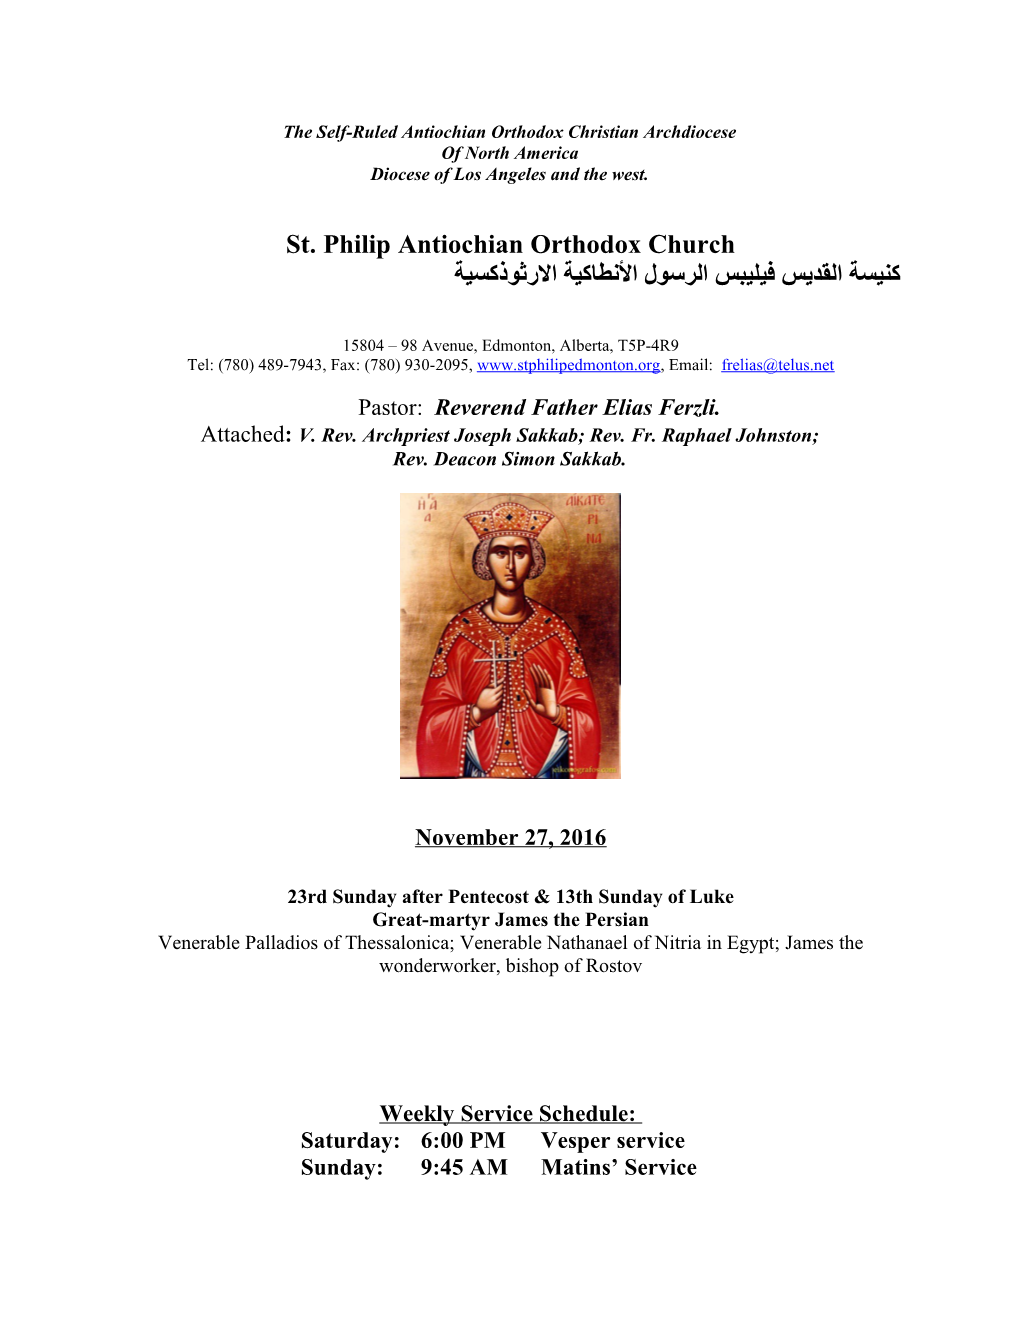 The Self-Ruled Antiochian Orthodox Christian Archdiocese s2